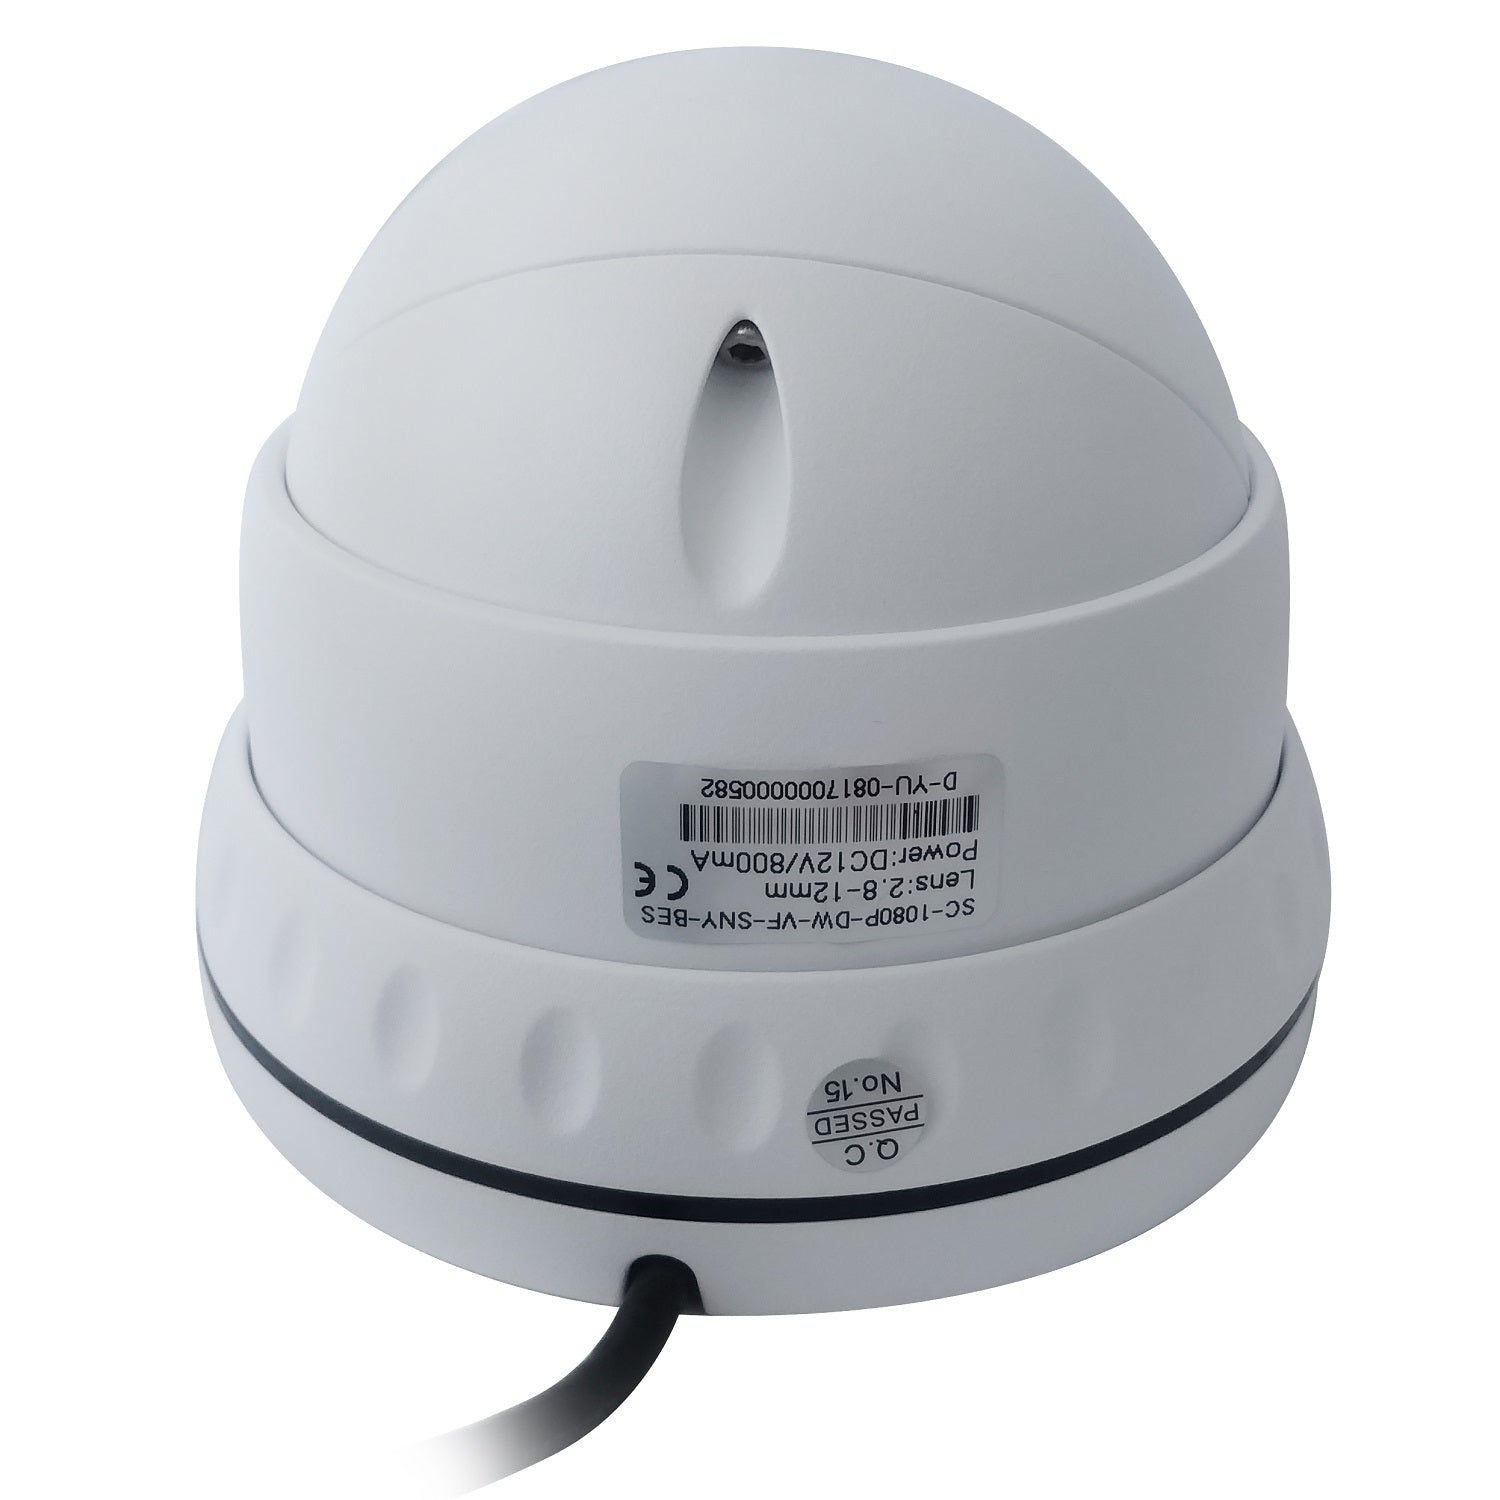 b-secure 2.0MP 4in1 White Dome CCTV Camera - Varifocal